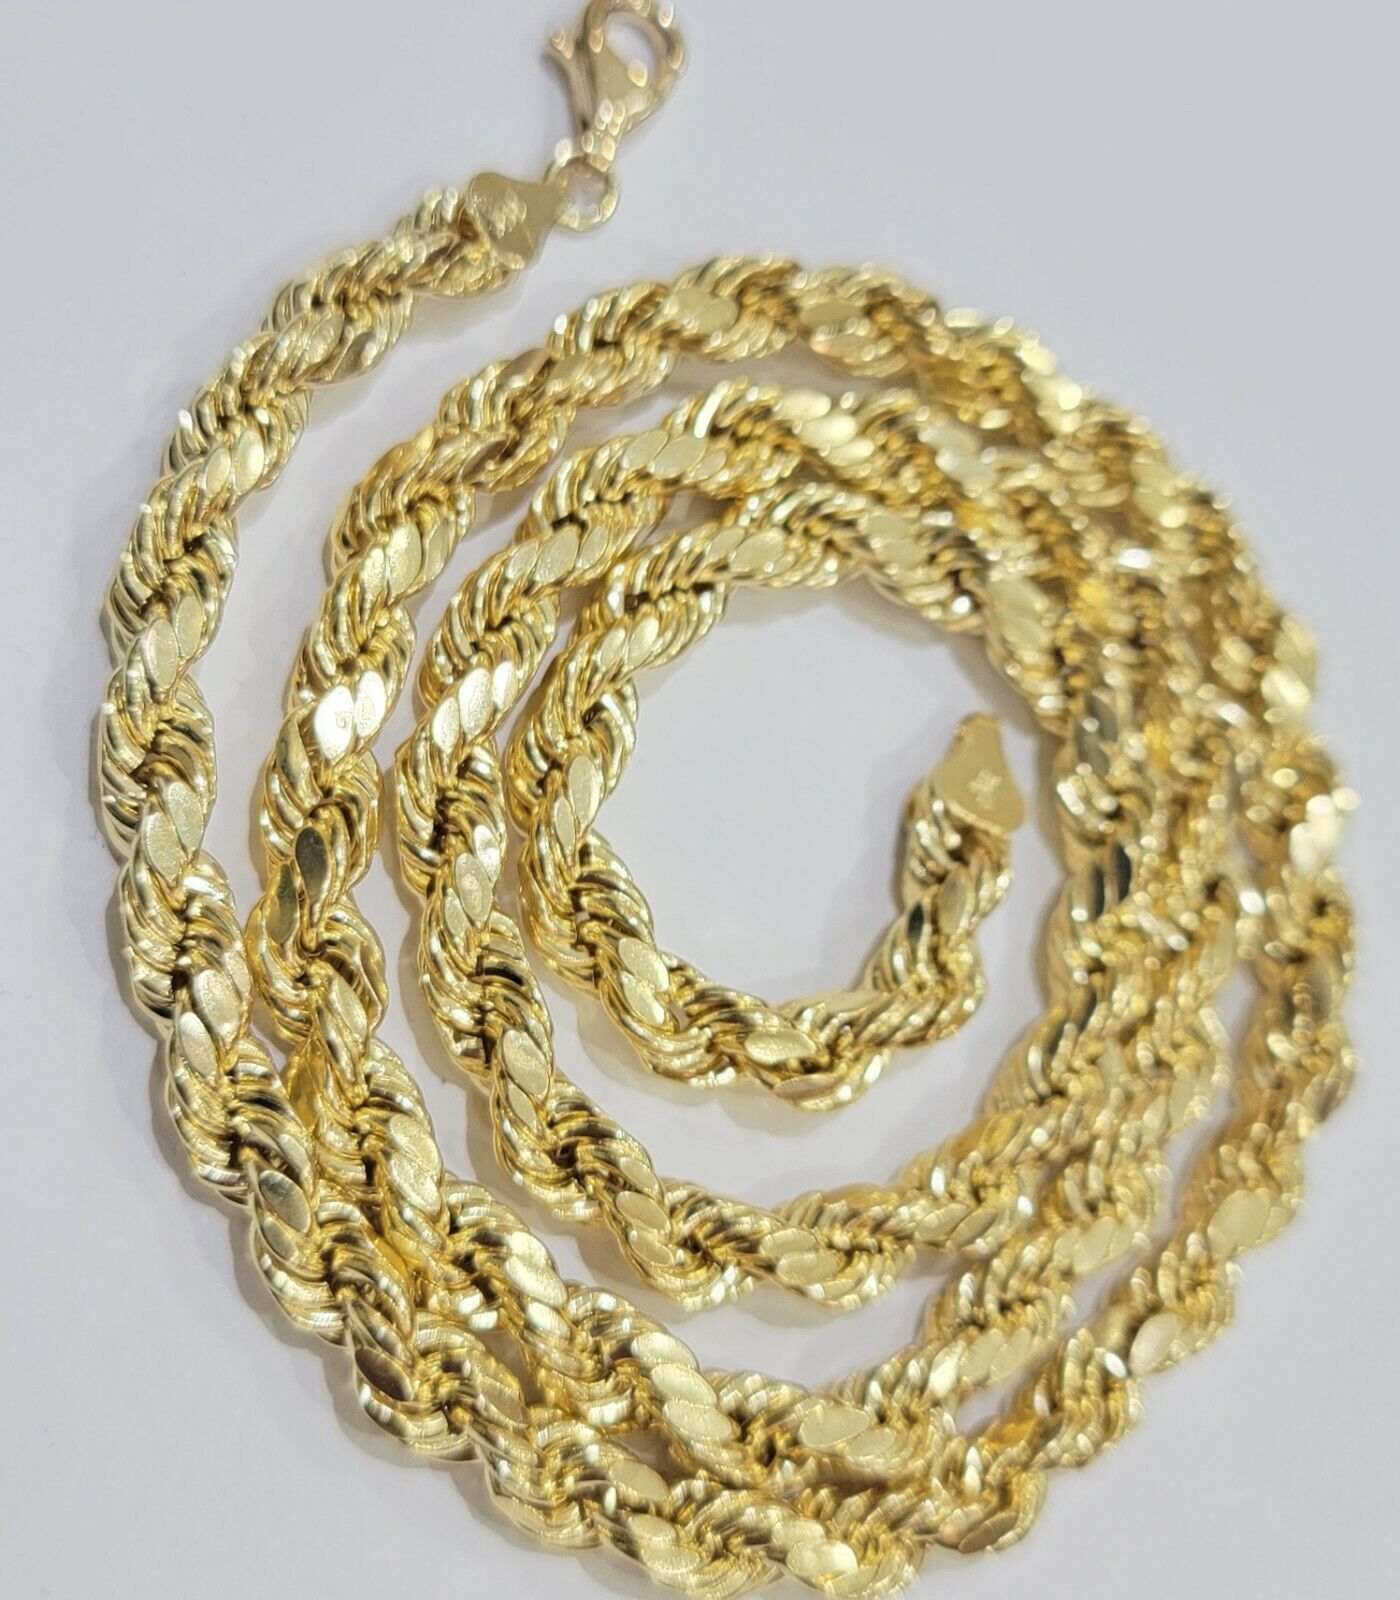 REAL 10K Gold Rope Chain 7mm 26 Inch Men Necklace Gold Diamond Cut